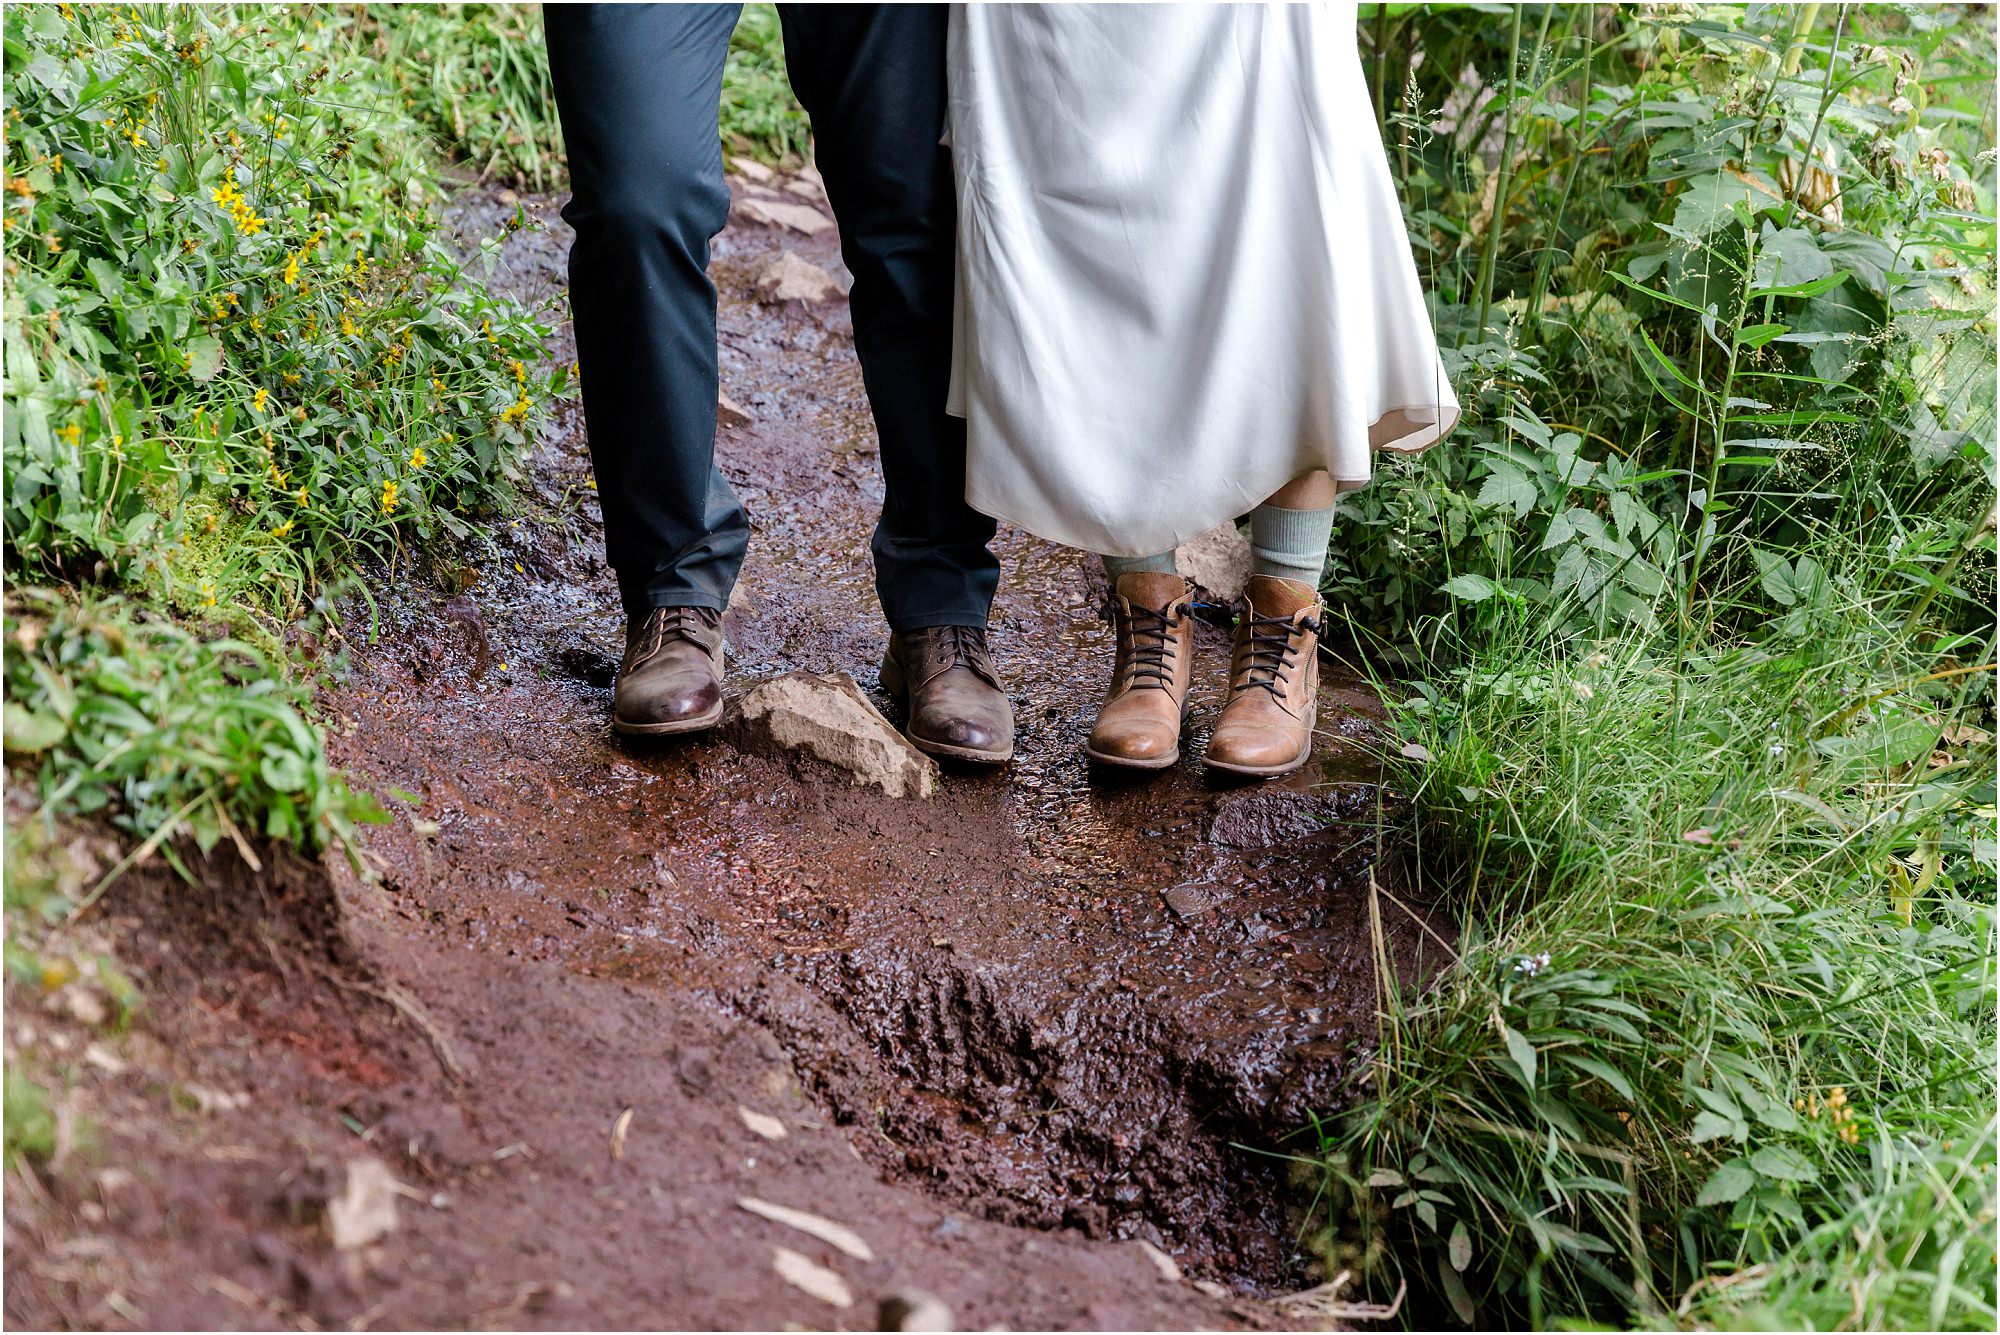 A bride wears hiking boots and lifts her dirty white dress in the mud on the trail to the waterfall during their Tumalo Falls elopement adventure photo session. | Erica Swantek Photography